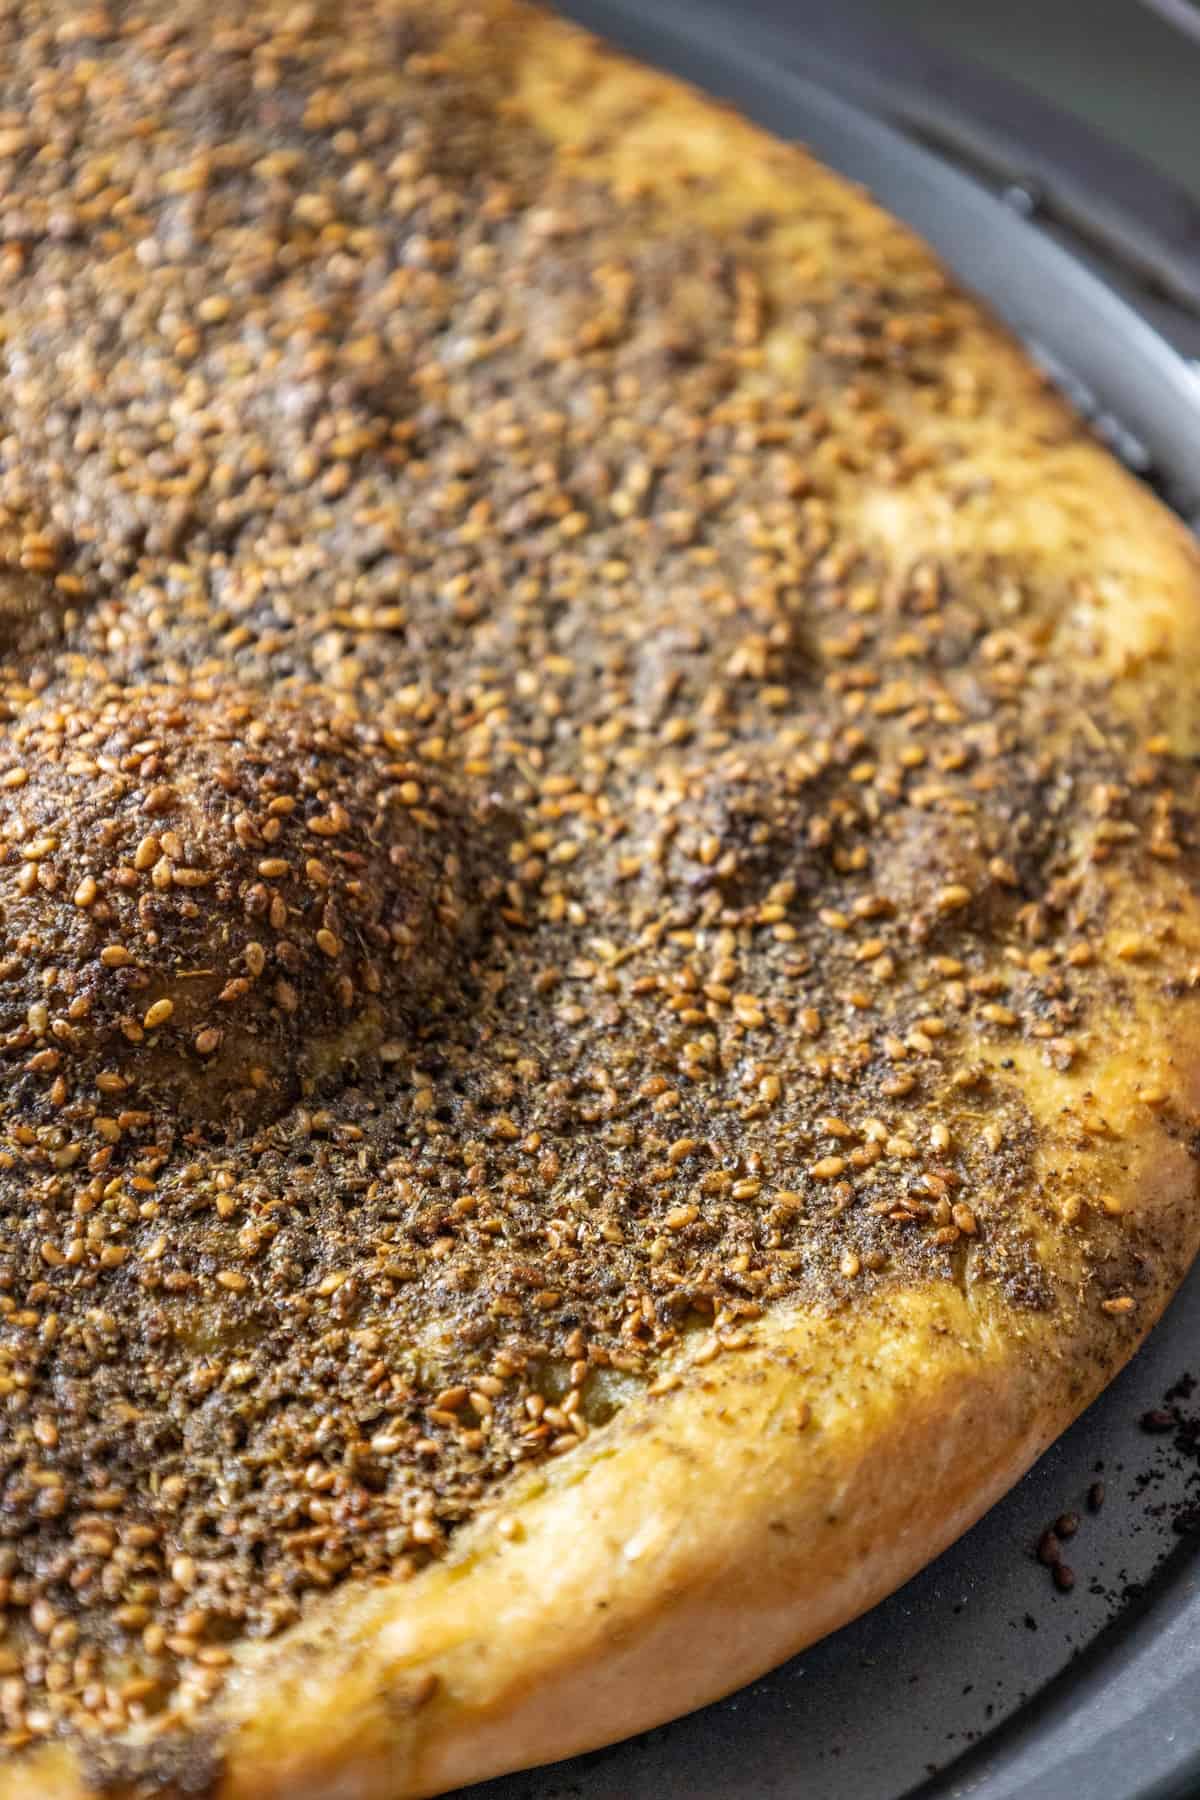 A Za'atar pizza, also known as za'atar manakish, is sitting on a pan with seeds on it.